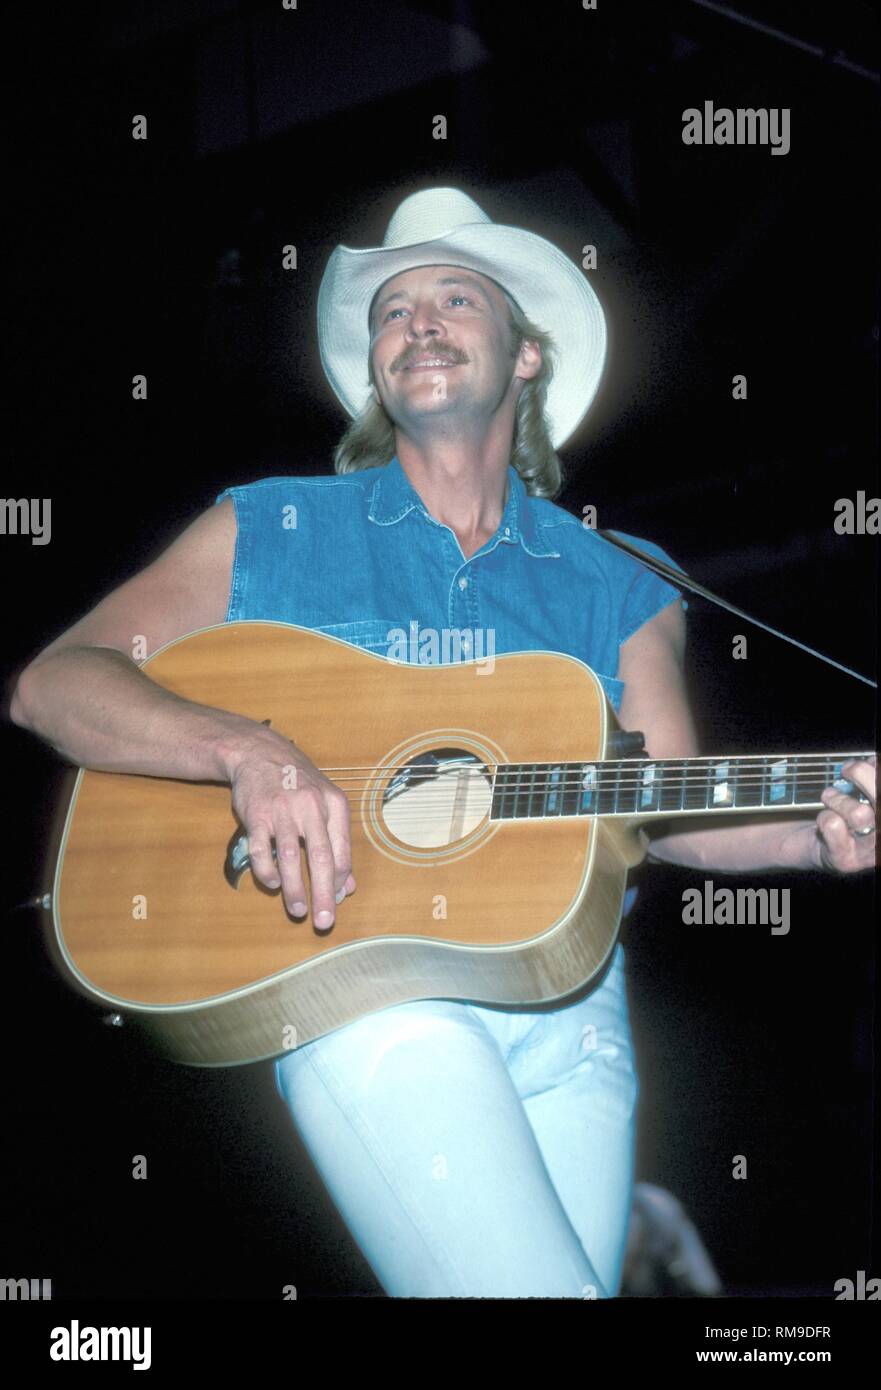 Country music star Alan Jackson is shown performing on stage with his  acoustic guitar during a "live" concert appearance Stock Photo - Alamy